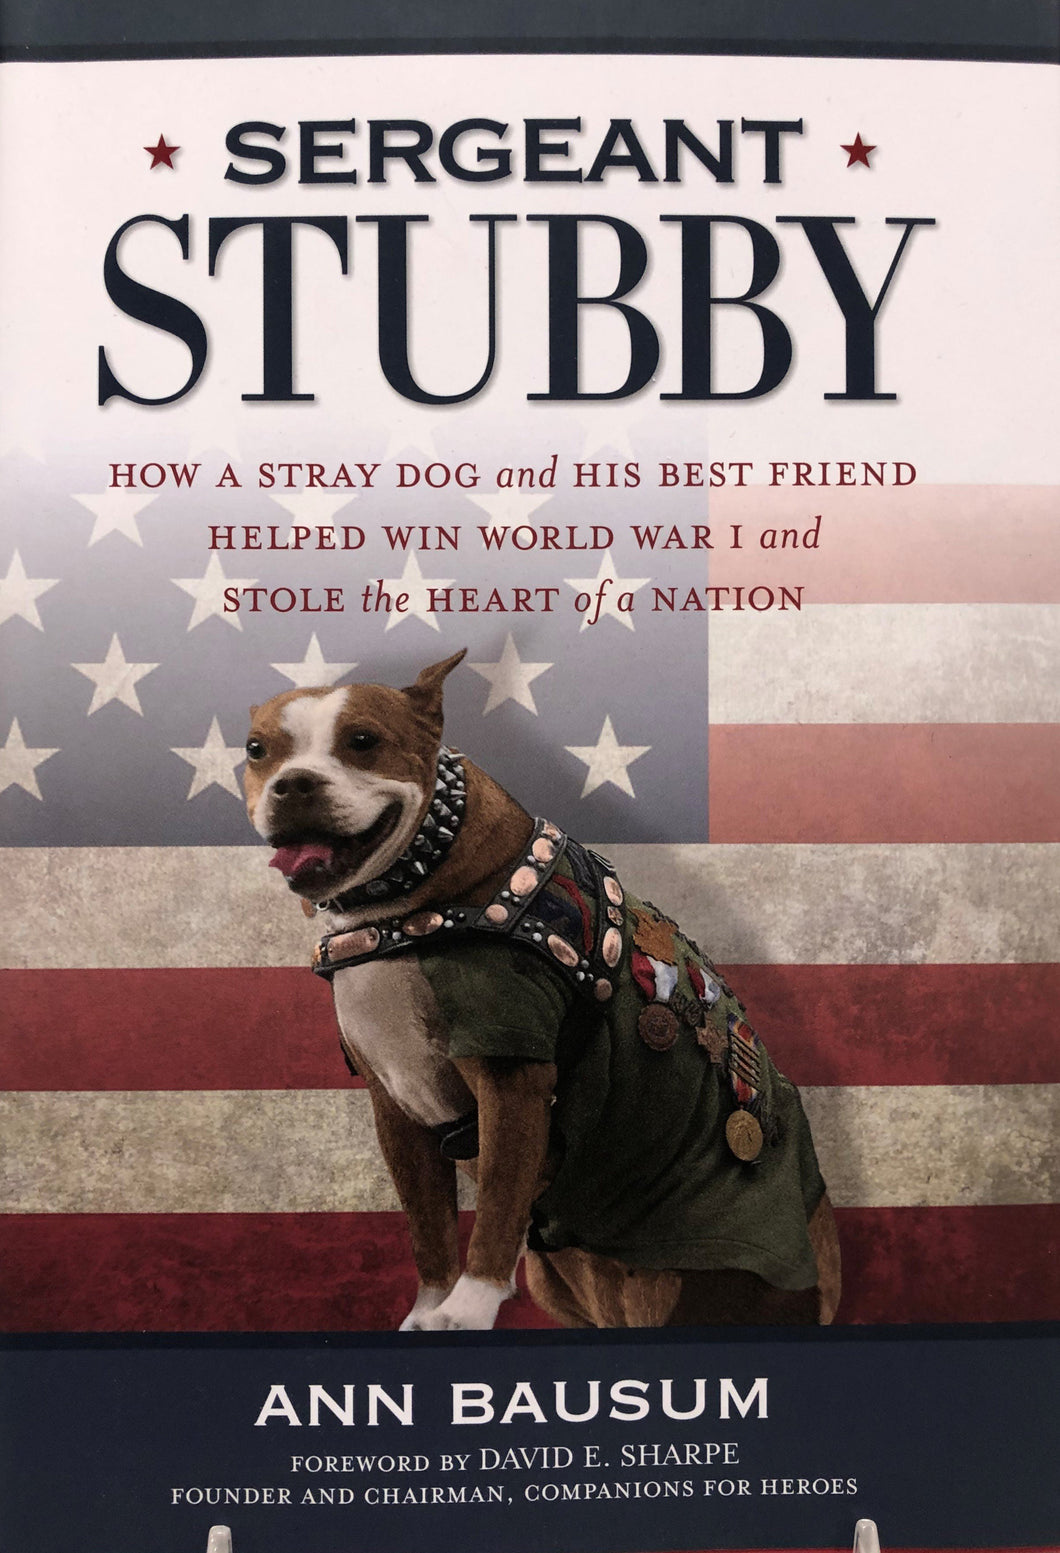 Sergeant Stubby: How a Stray Dog and his Best Friend Helped Win World War I and Stole the Heart of a Nation